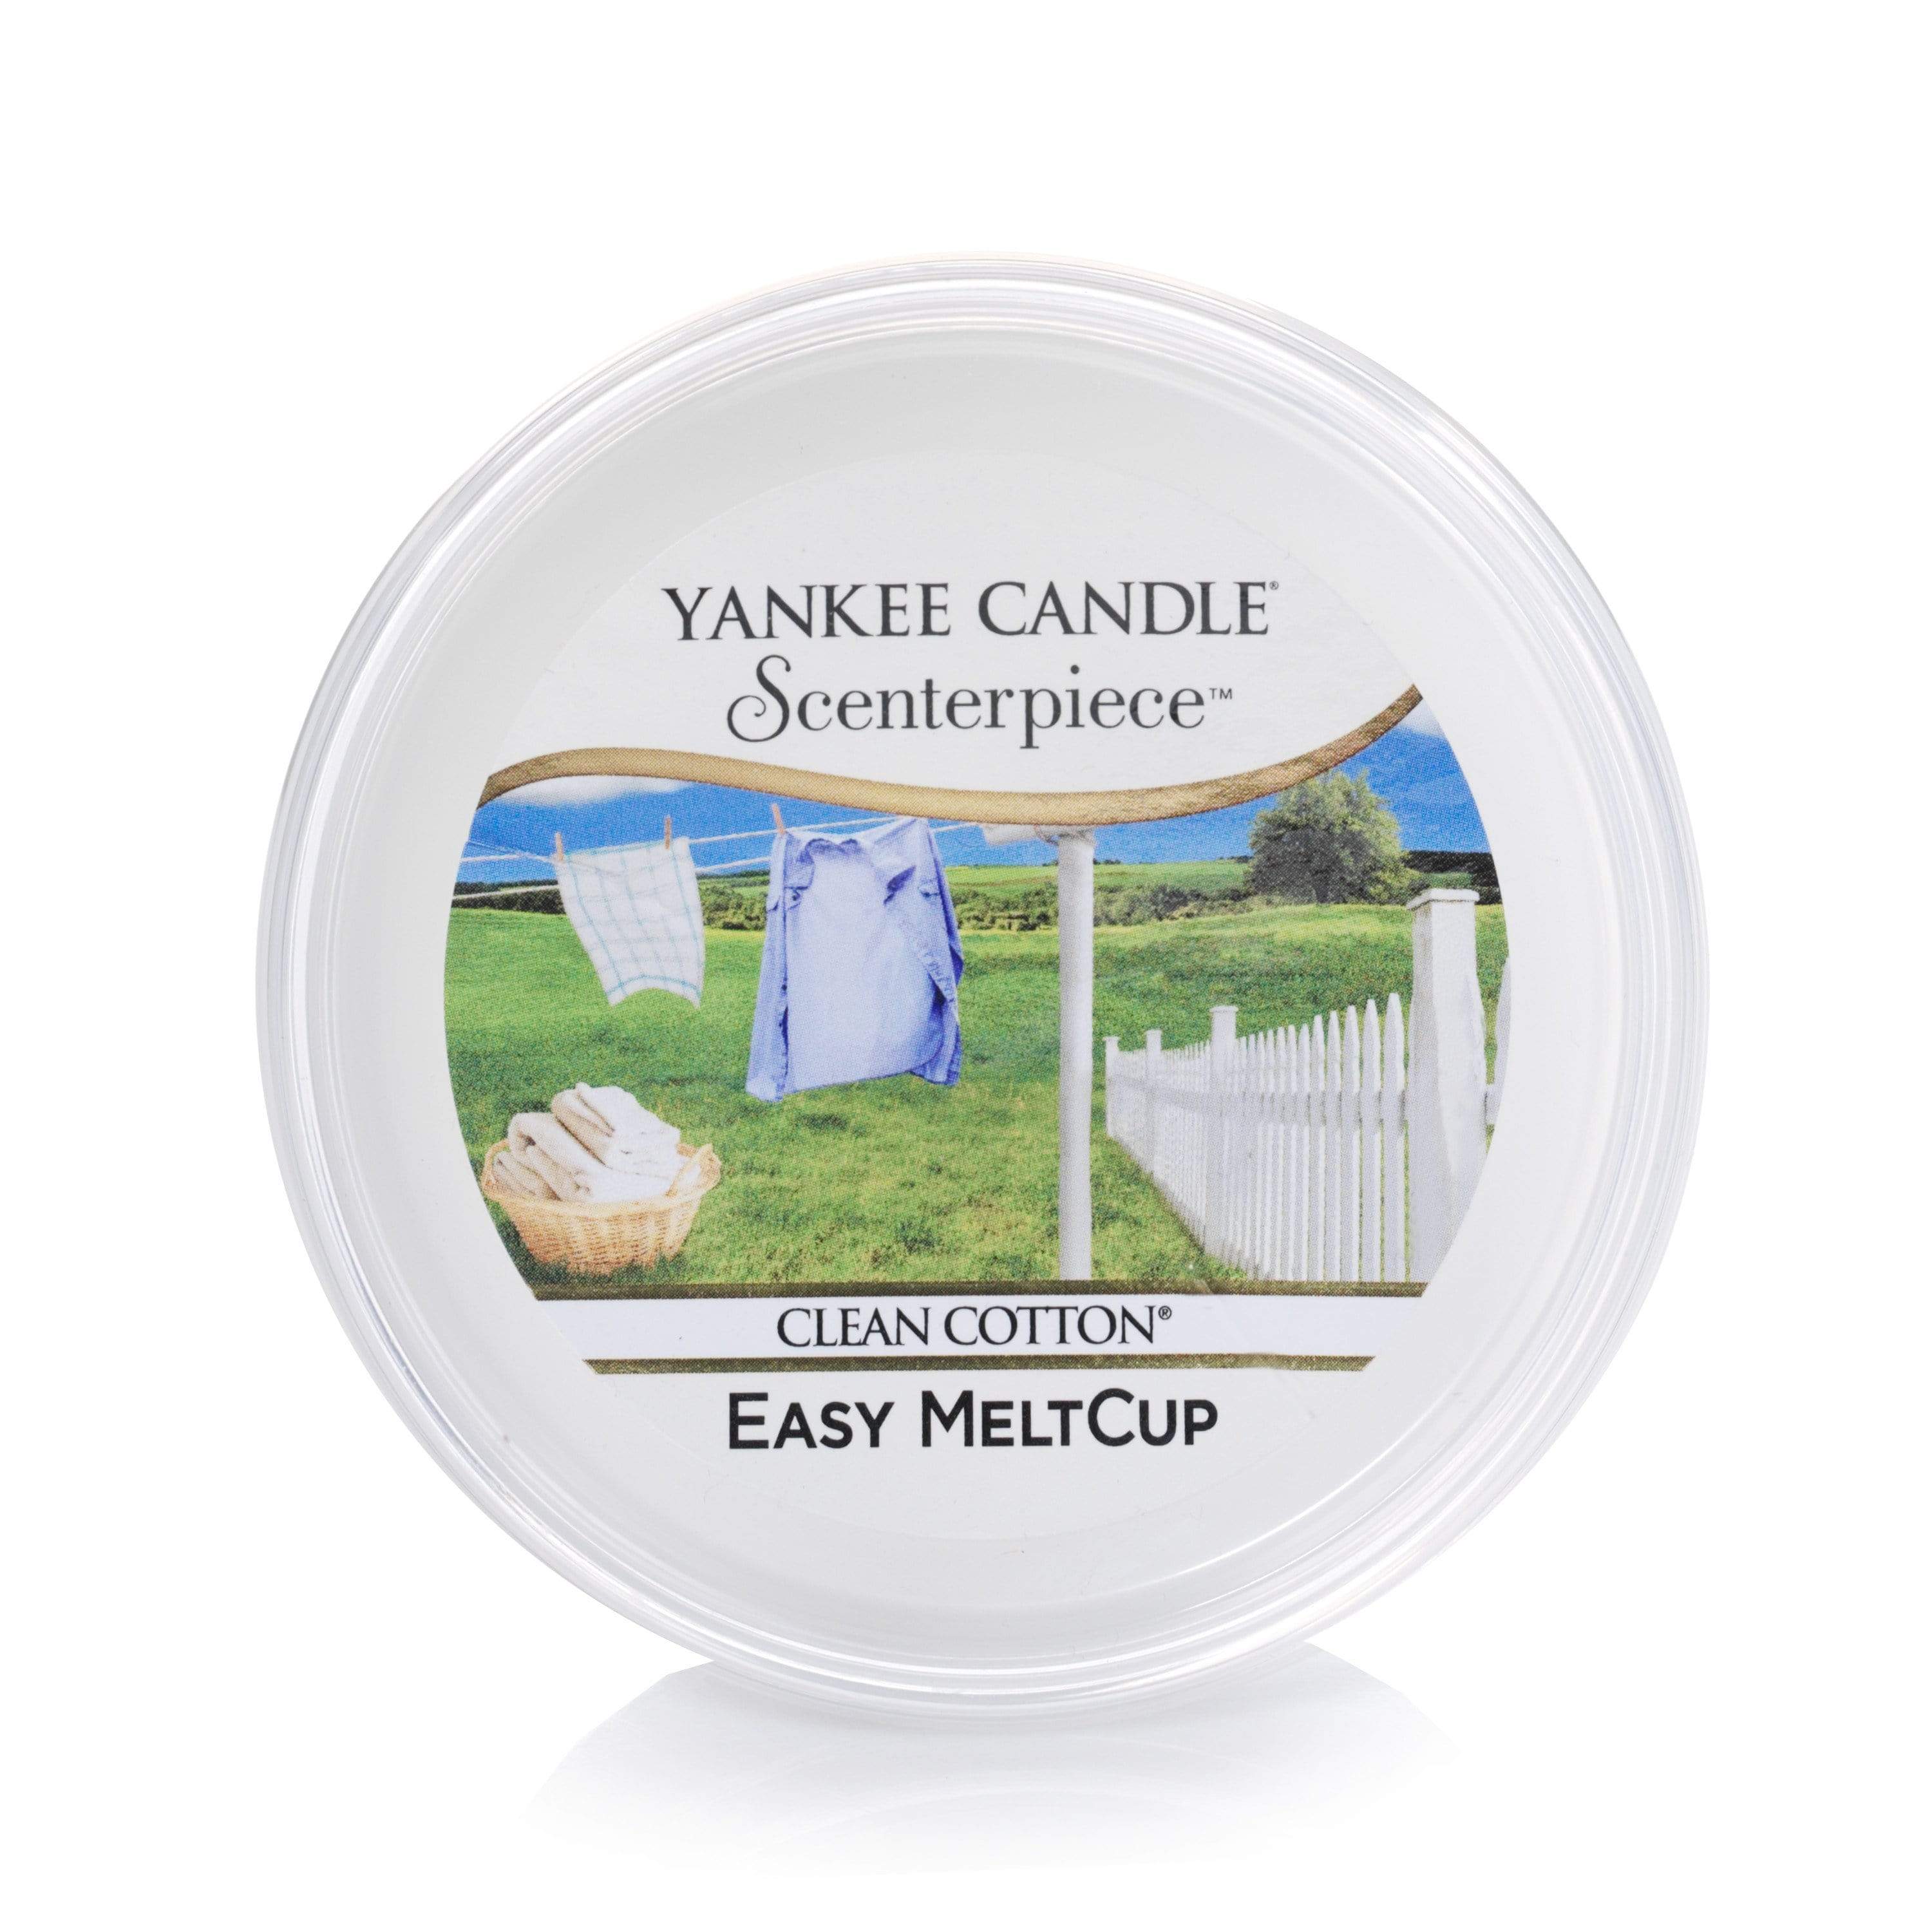 Yankee Candle Melt Cup Yankee Candle Scenterpiece Melt Cup - Clean Cotton